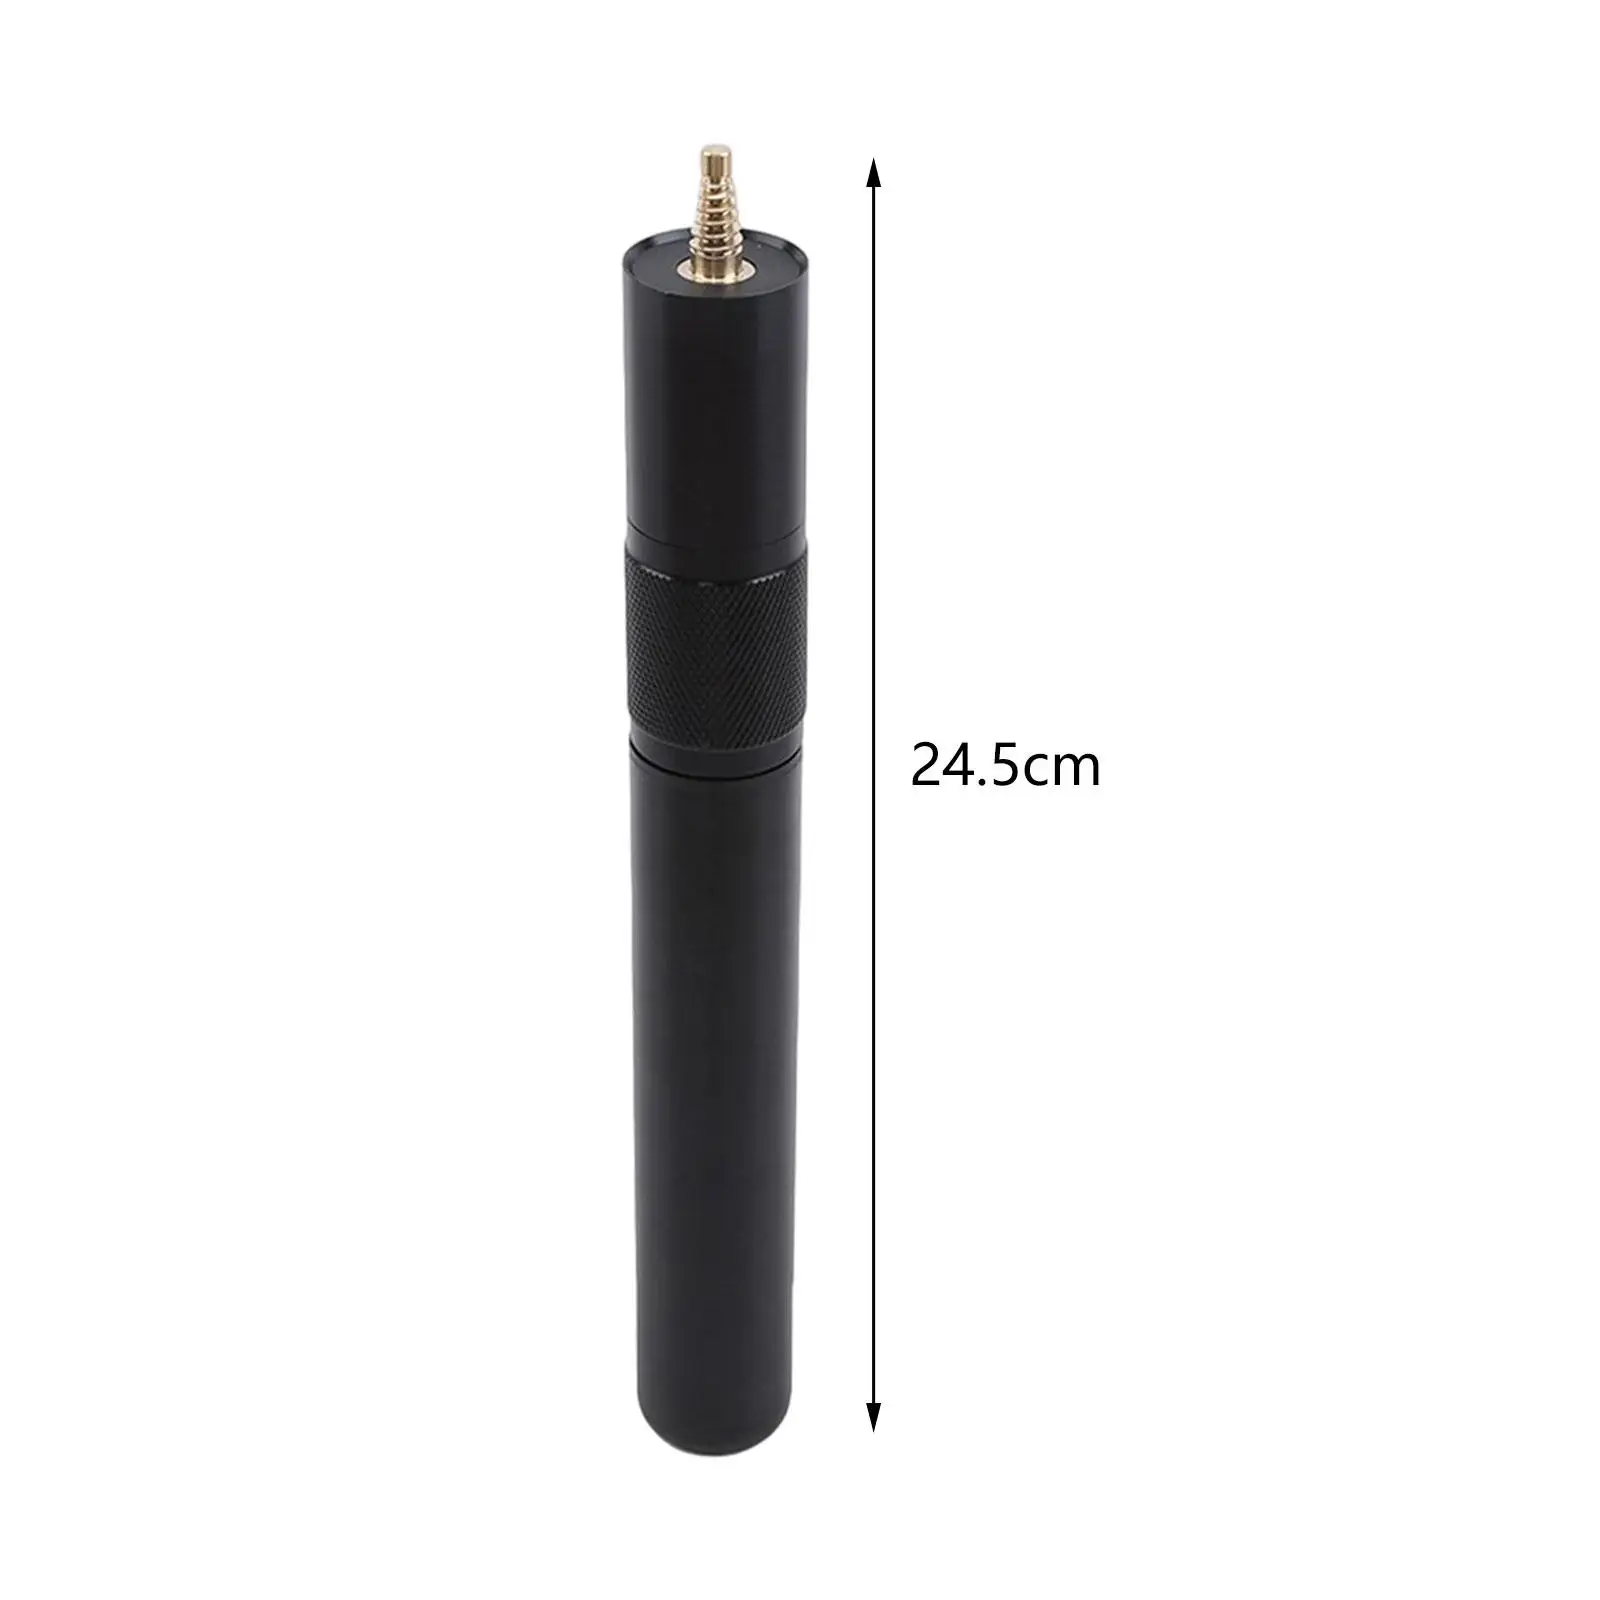 Telescopic Pool Cue Extender Cue End Lengthener Snooker Cue Extension for Billiard Cues Athlete Enthusiast Men Women Accessory